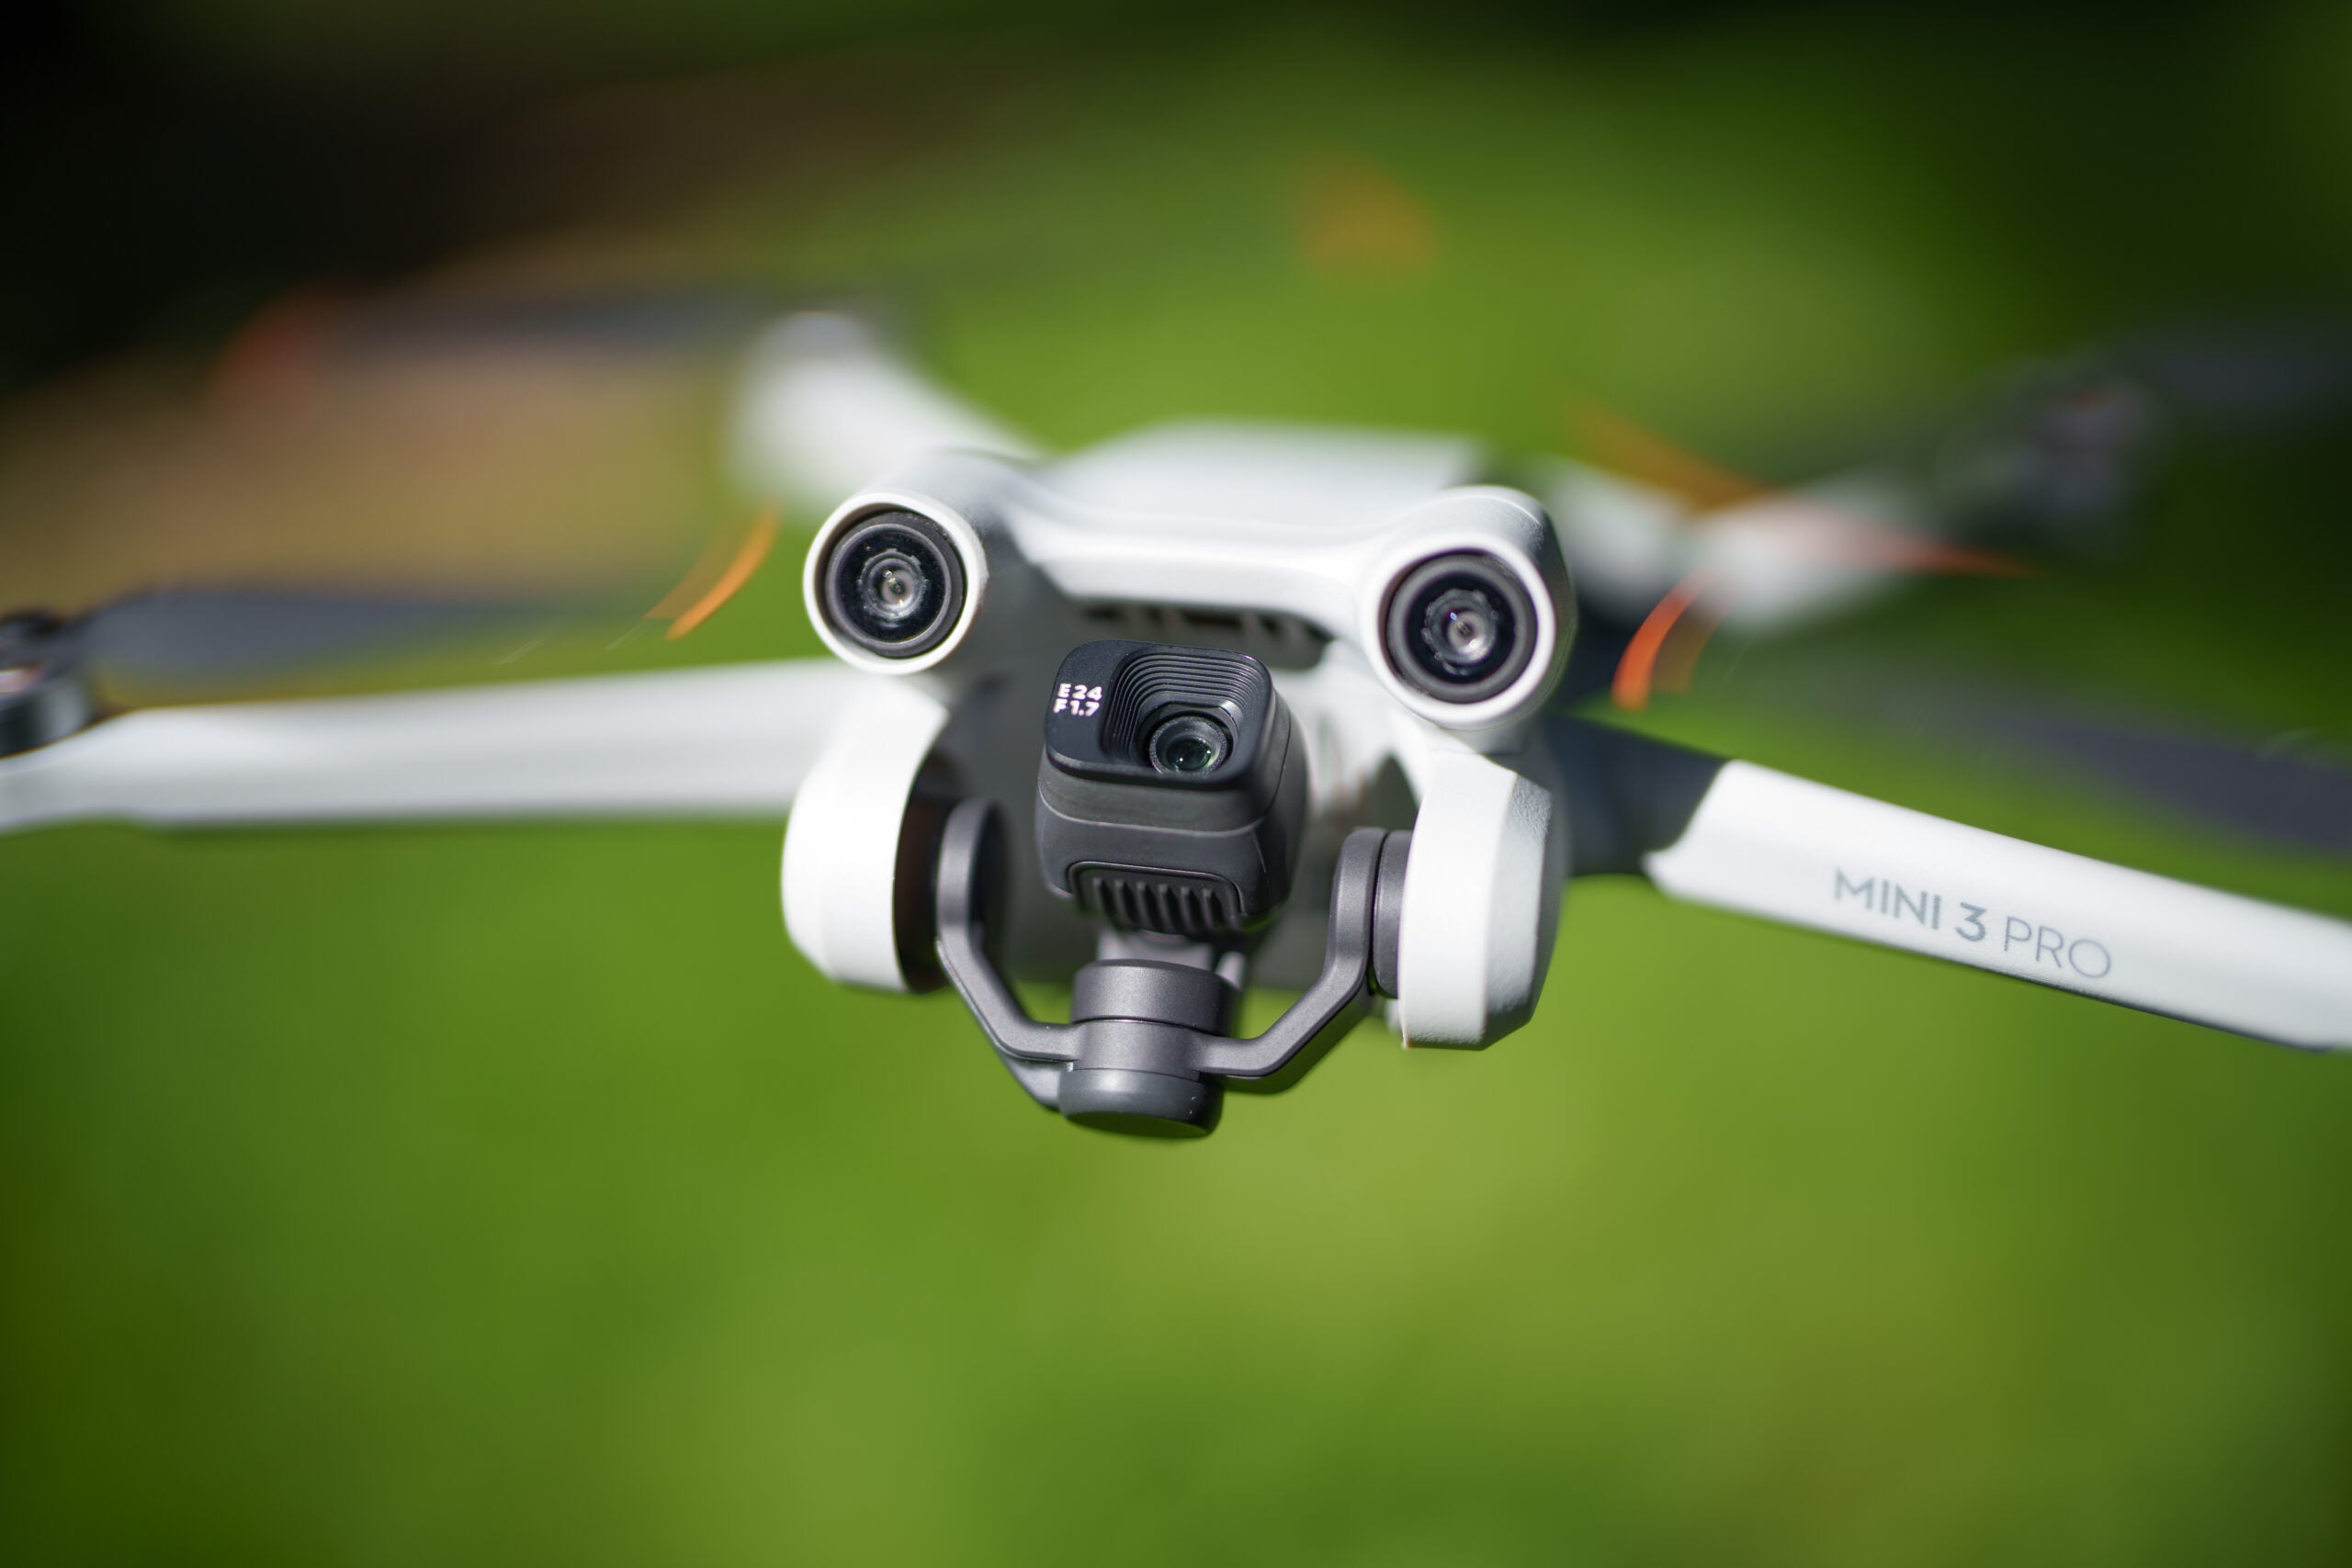 The Mini 3 Pro’s gimbal can point upwards 60 degrees, giving the tiny drone a point of view most drones can’t match.